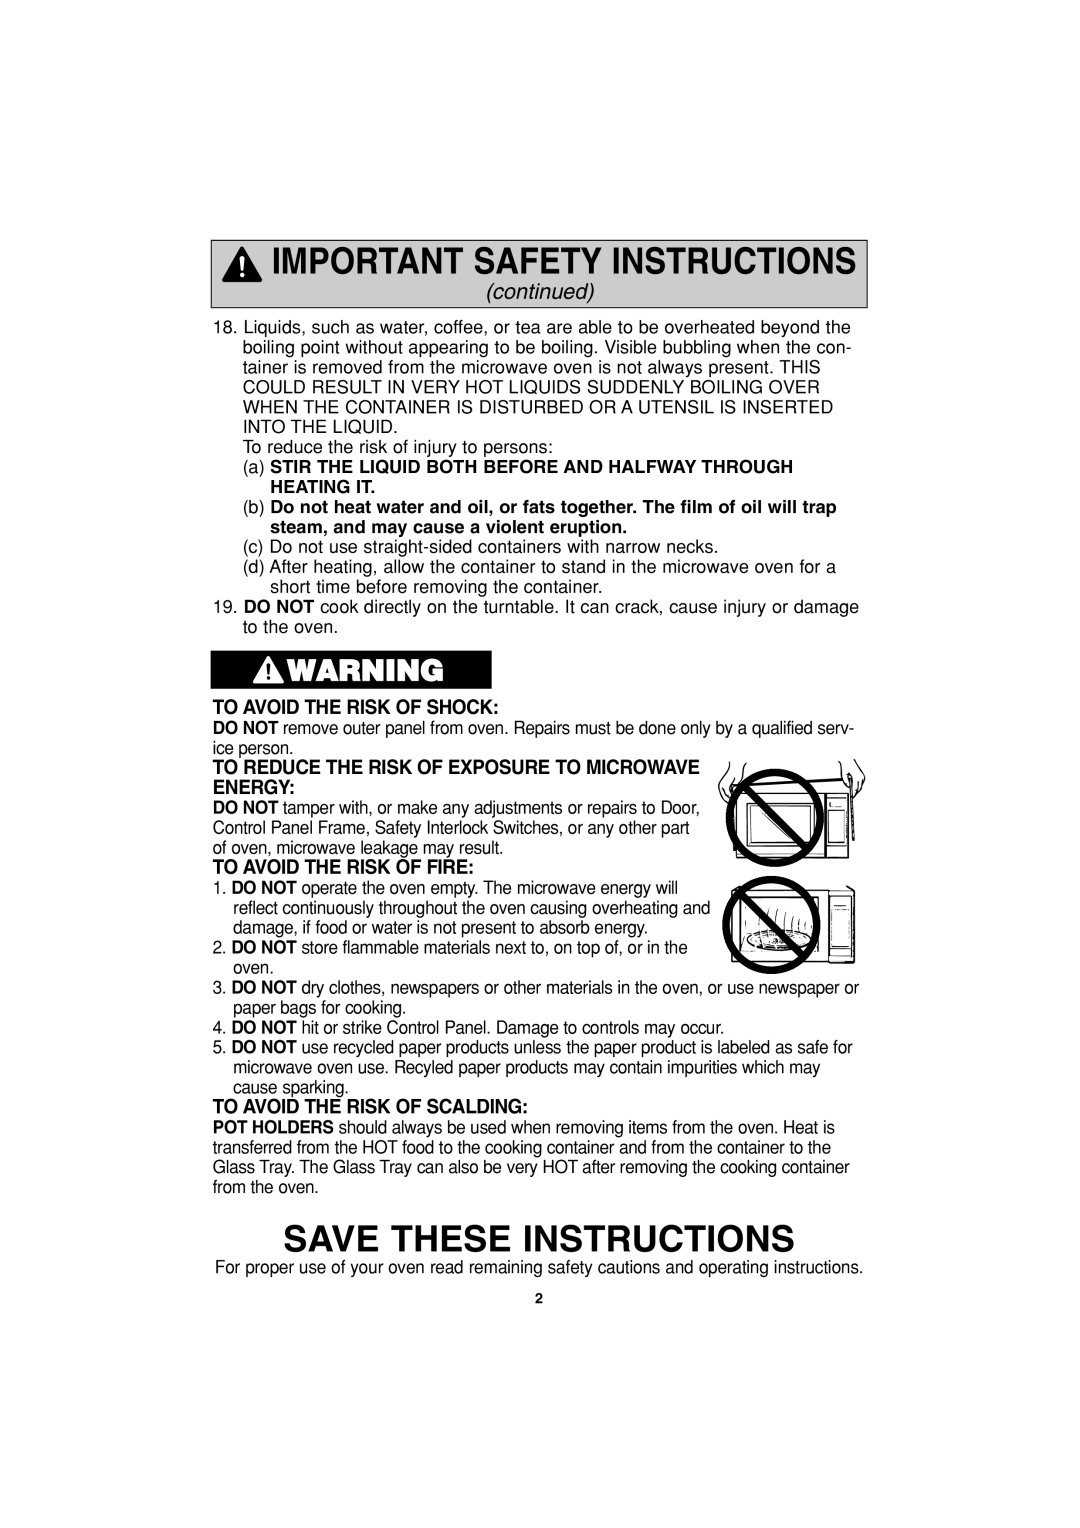 Panasonic NN-S443 Save These Instructions, continued, To Avoid The Risk Of Shock, To Avoid The Risk Of Fire 